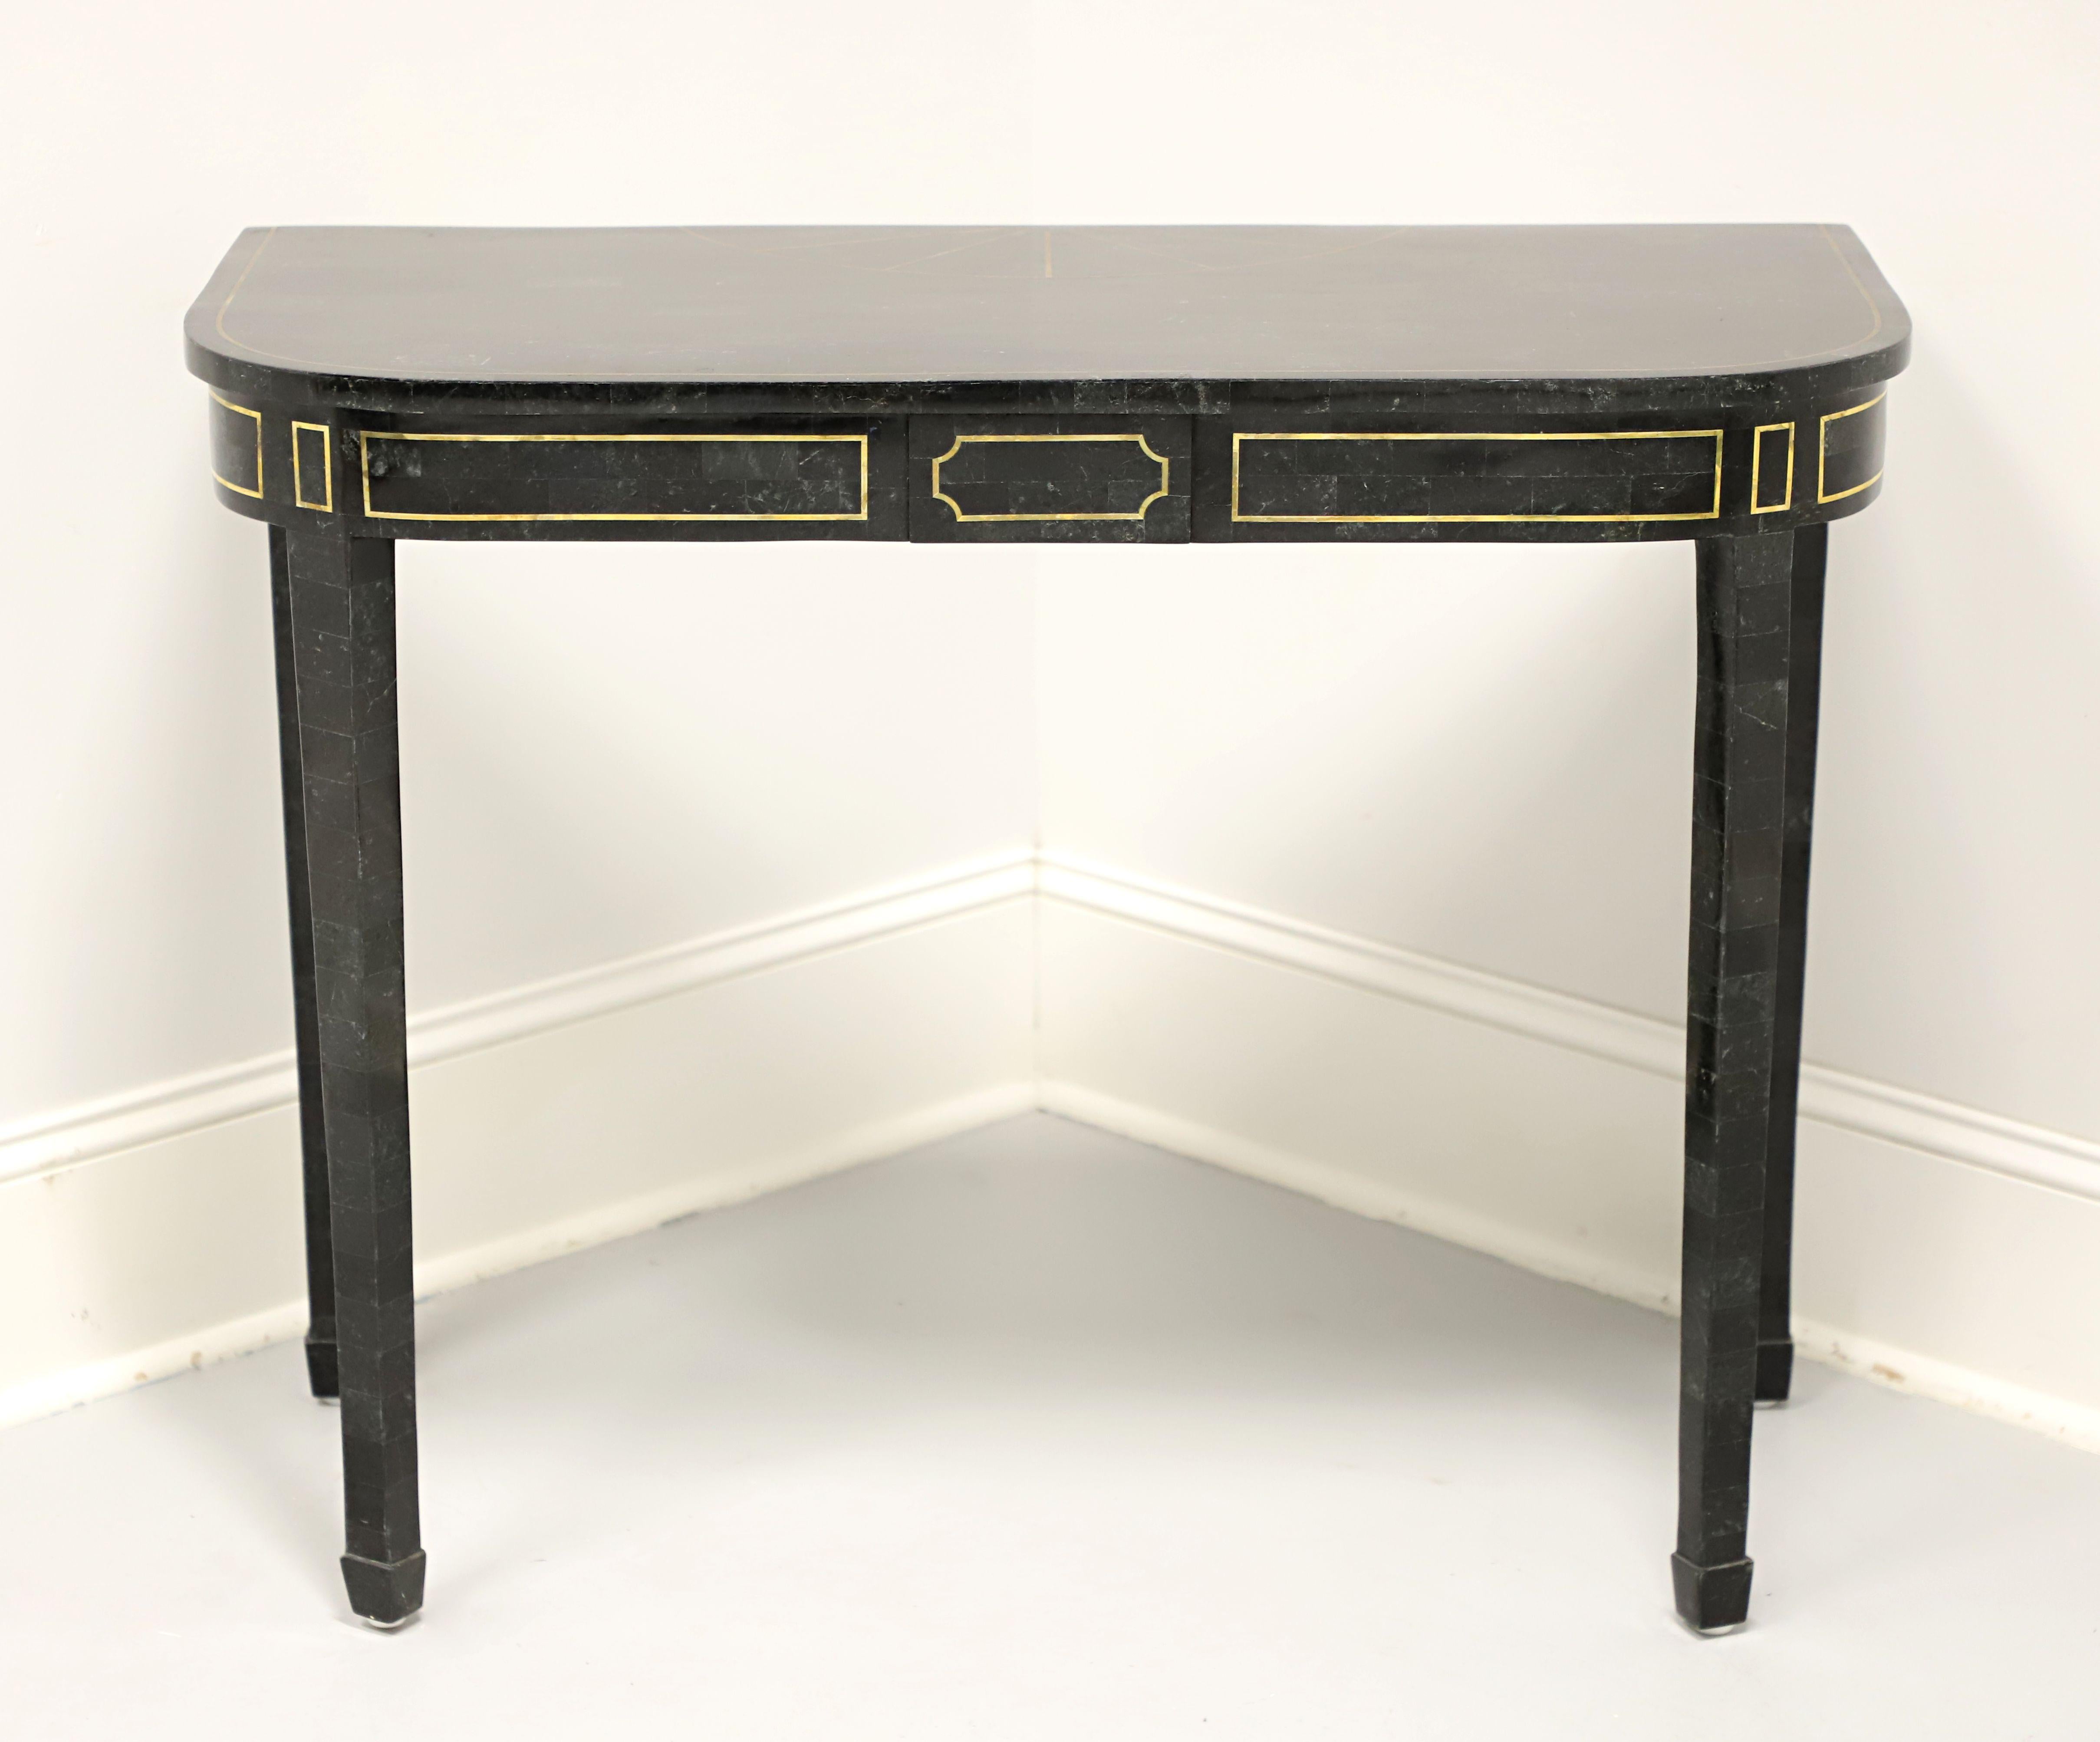 A Neoclassical style console table by Maitland Smith. Solid wood frame with tessellated green/black marble veneers, tessellated marble top with inlaid brass, rounded front corners, brass inlays to the apron, tapered straight legs and spade feet.